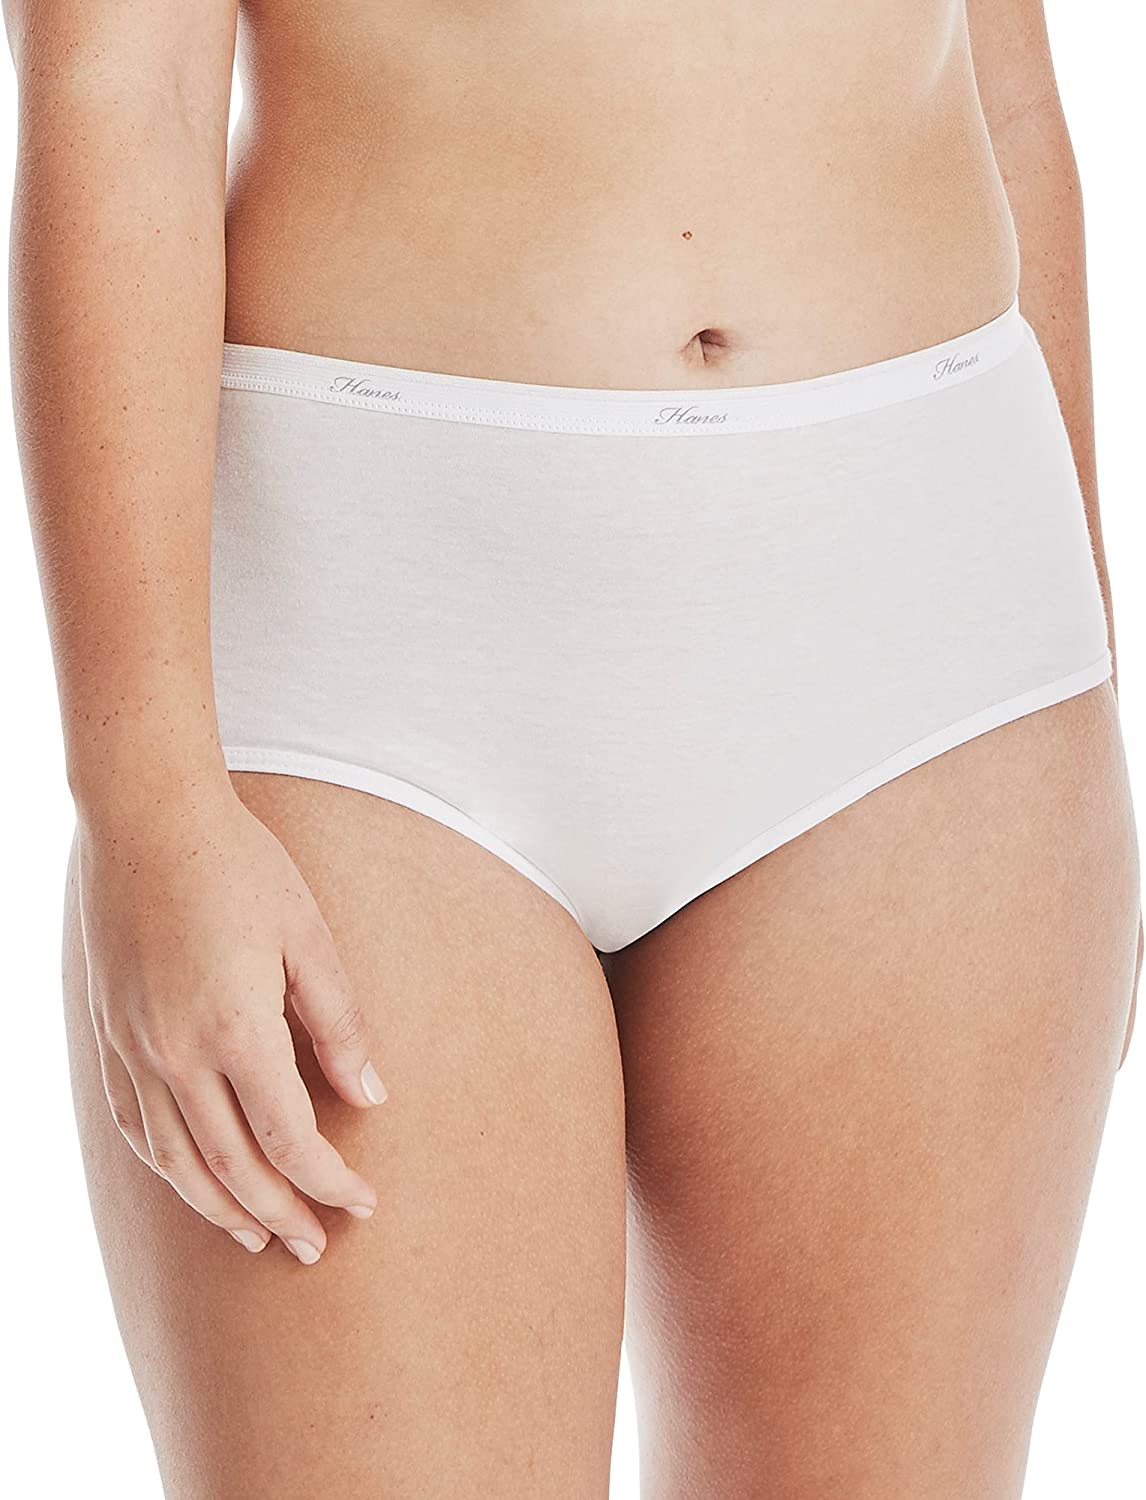 Hanes Low Rise Bikini Brief Pack of 3's Large, White